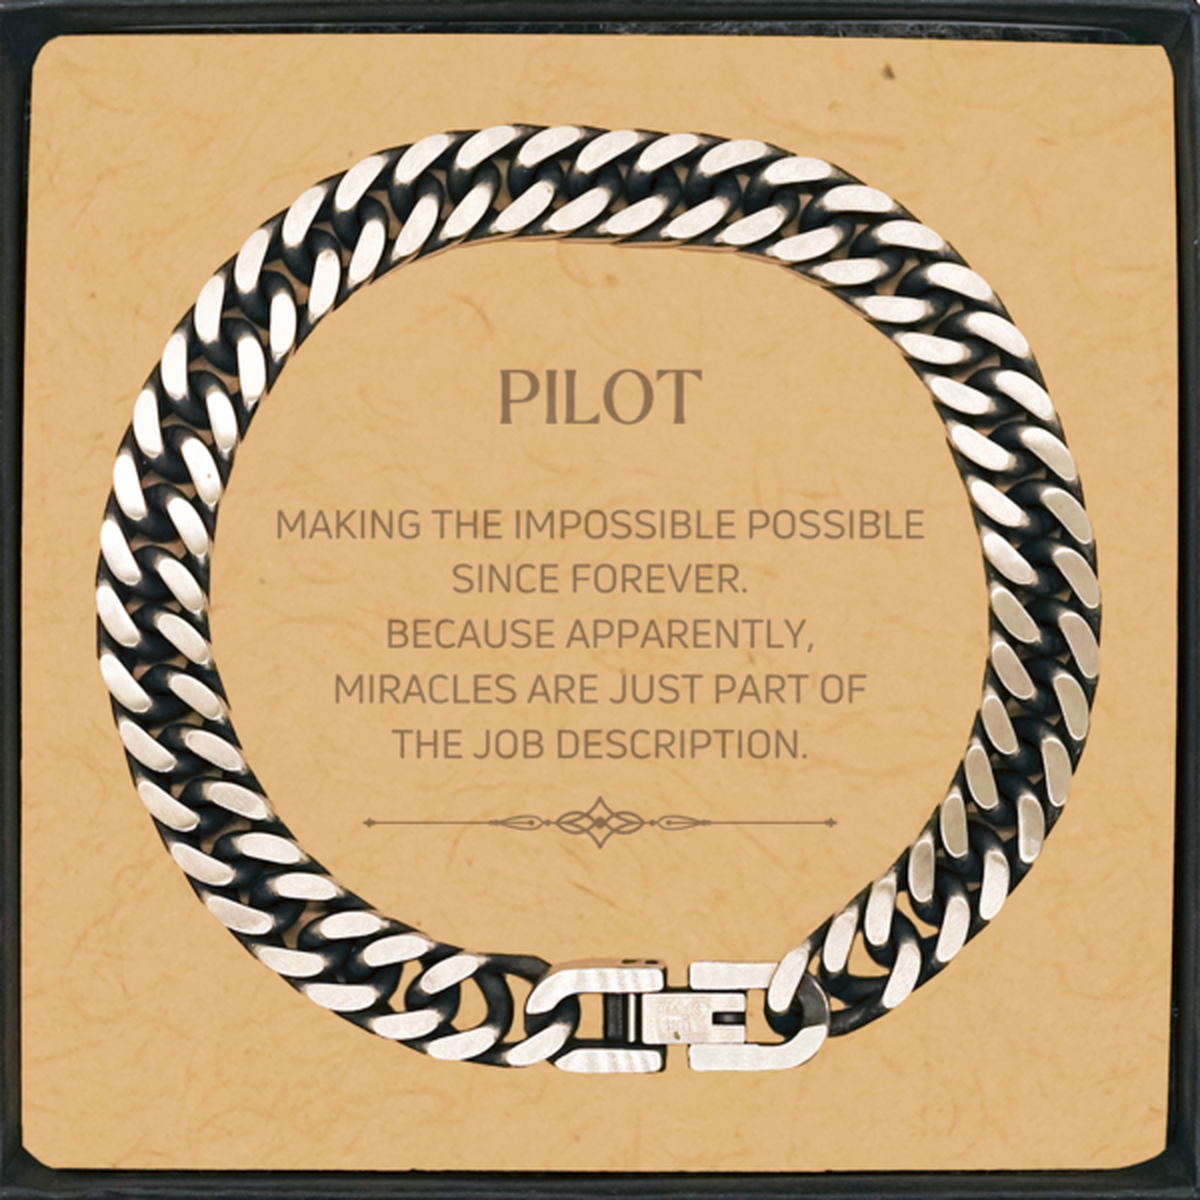 Funny Pilot Gifts, Miracles are just part of the job description, Inspirational Birthday Cuban Link Chain Bracelet For Pilot, Men, Women, Coworkers, Friends, Boss